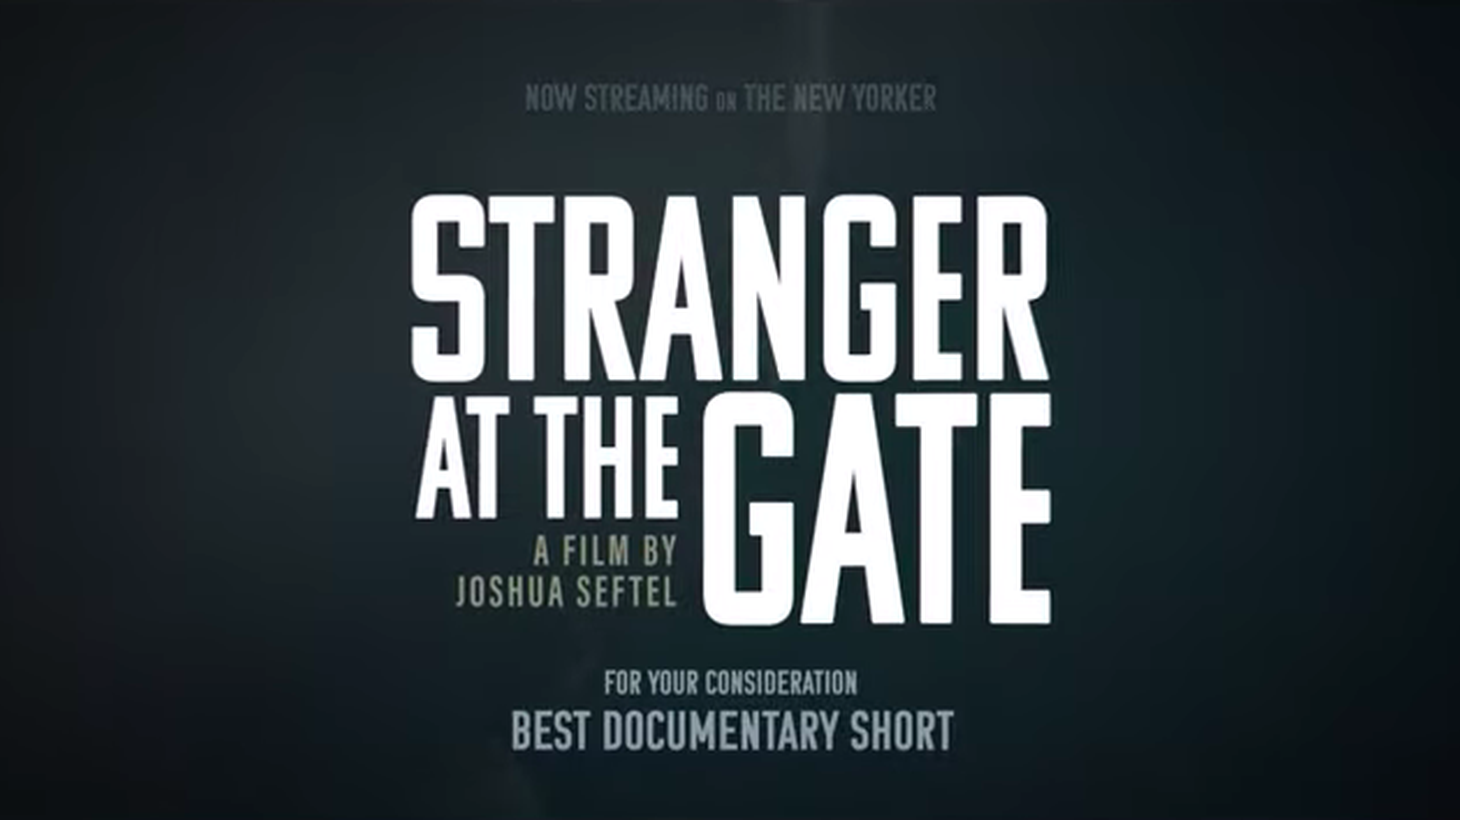 “Stranger at the Gate” focuses on military veteran Mac McKinney, who planned to bomb a mosque but ultimately became the president there and converted to Islam.